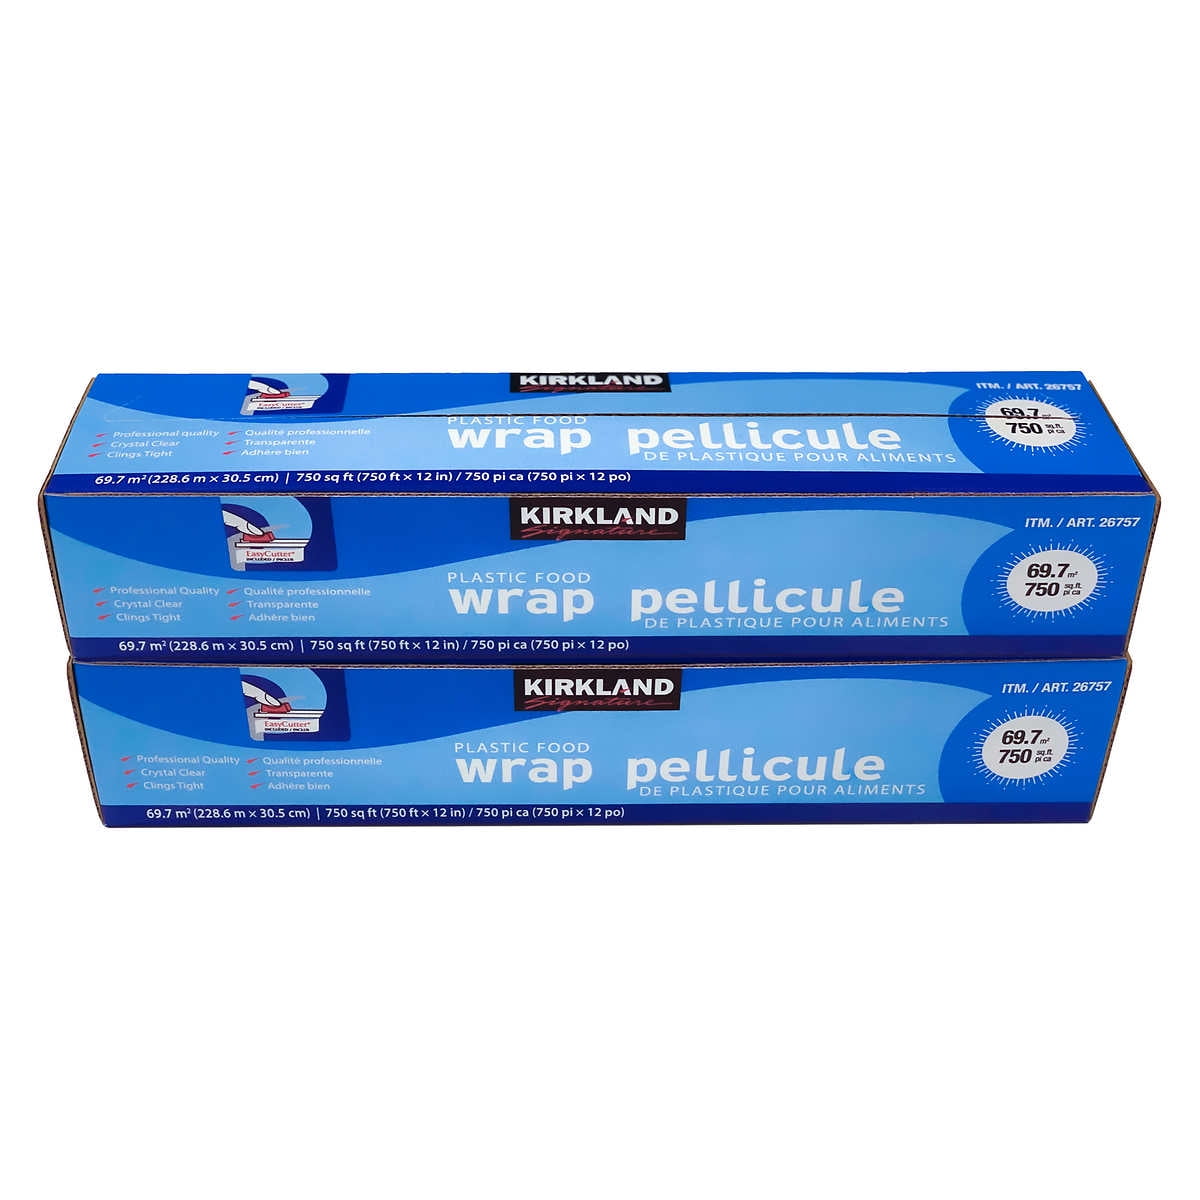 Duck Food Wrap, 12x 2000 ft. Plastic Wrap with Seal & Slide Cutter on Box - Restaurant & Commercial Grade, Excellent Quality & Heavy Duty - Great for